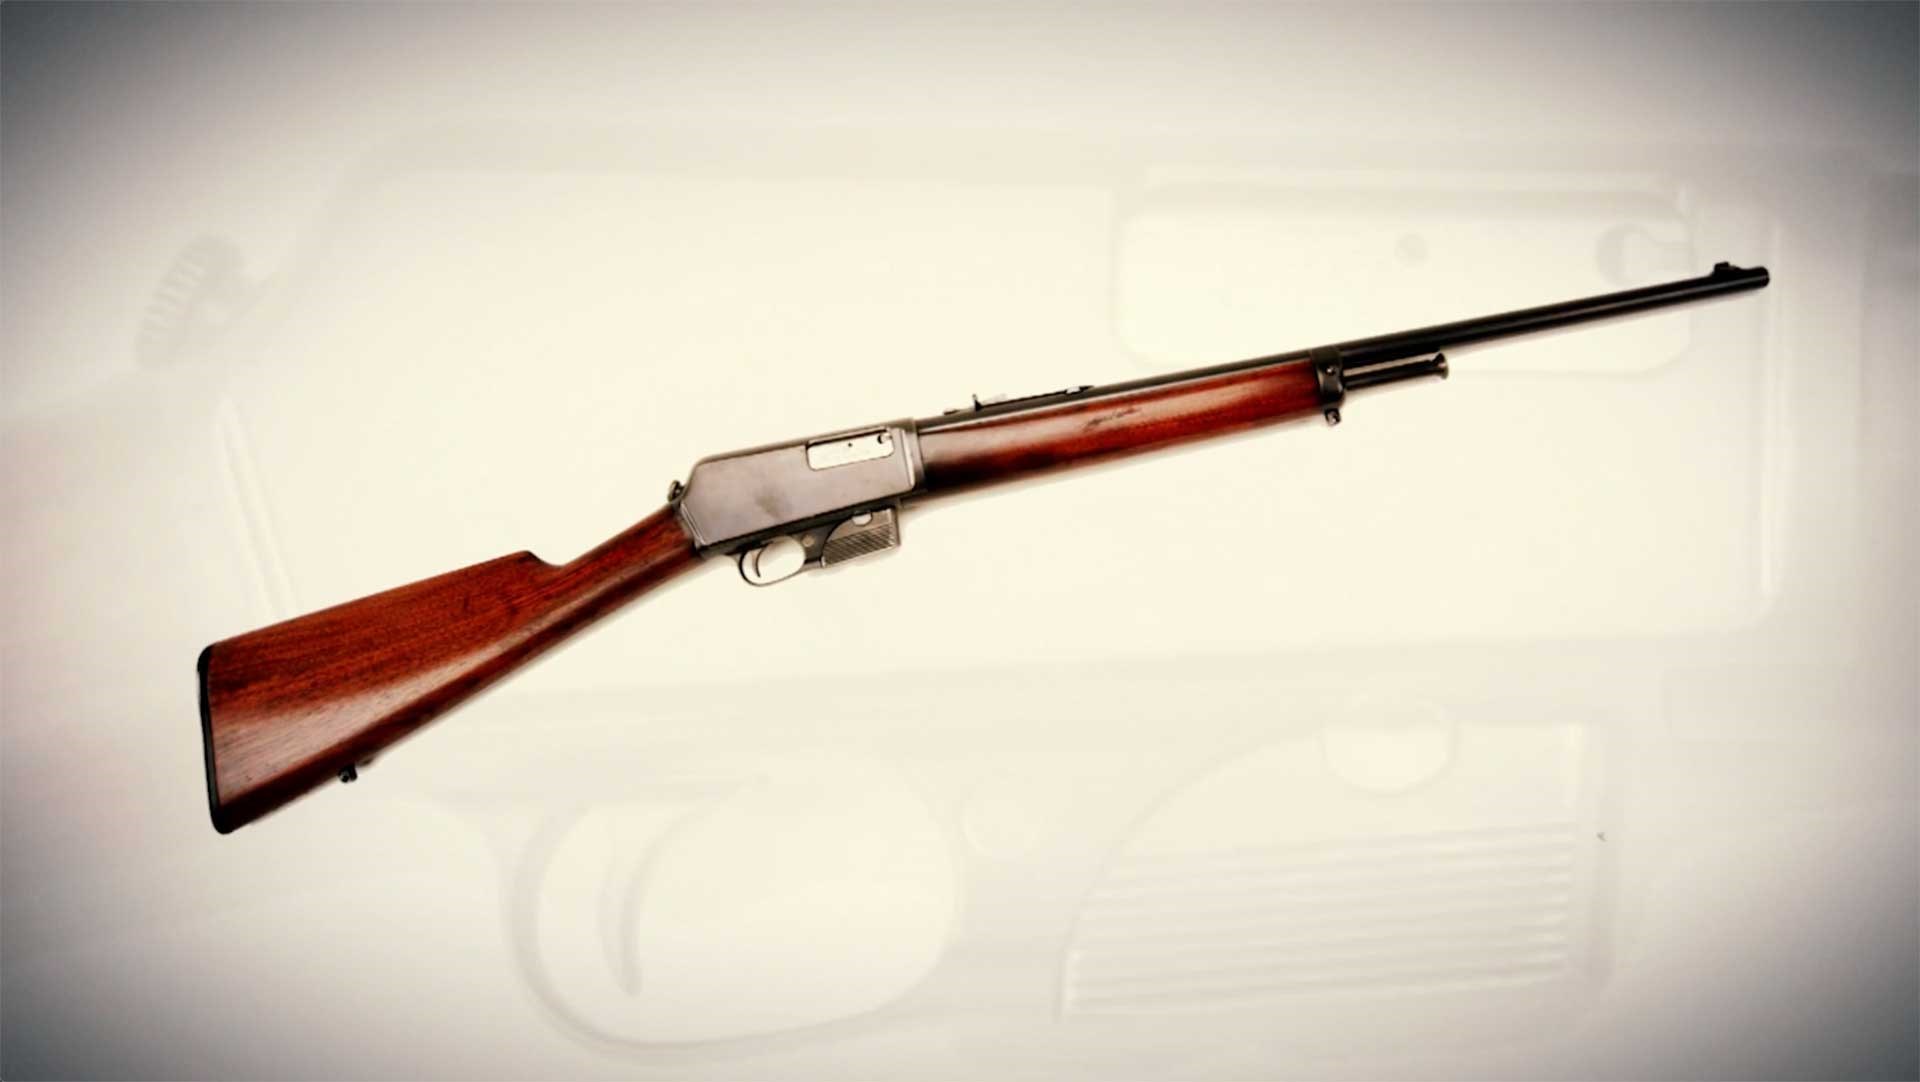 Right hand profile view of the Winchester Model 1907 rifle.